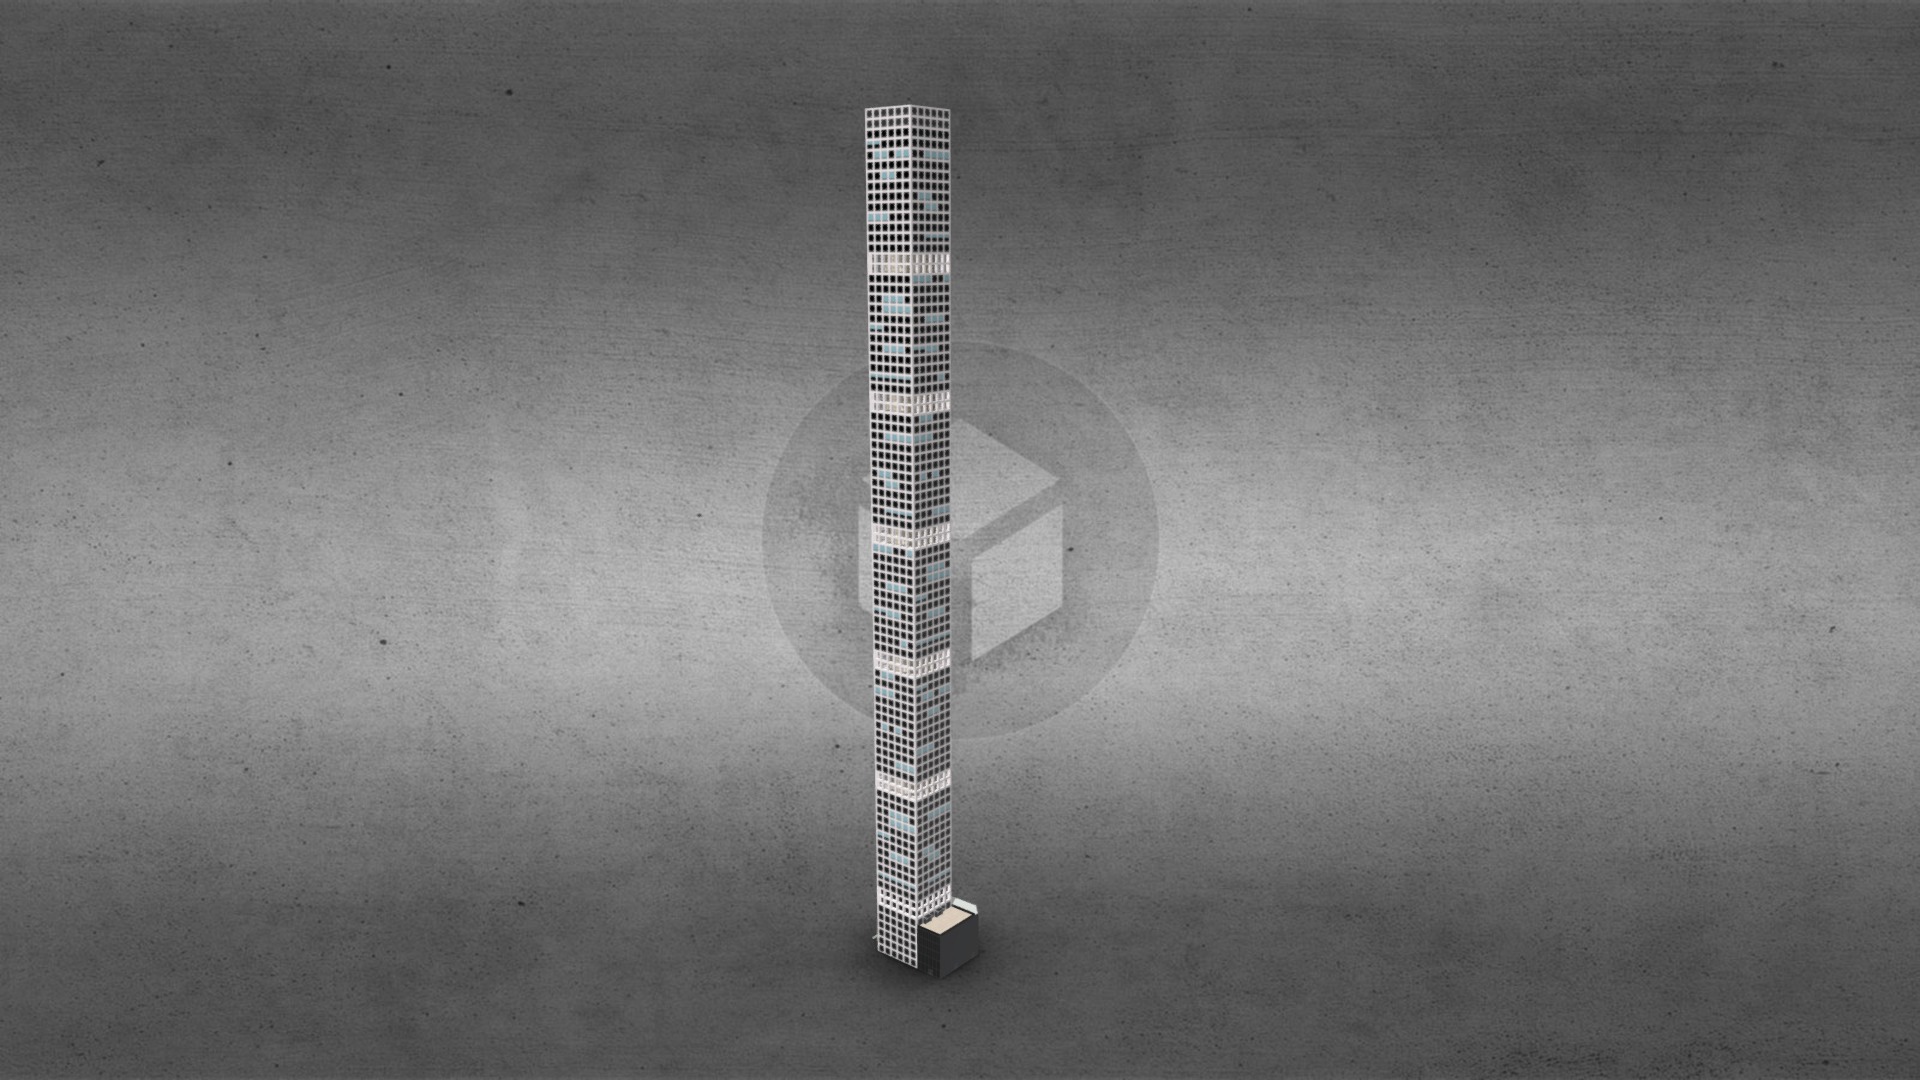 3D model 432 Park Avenue – New York - This is a 3D model of the 432 Park Avenue - New York. The 3D model is about a guitar on a table.